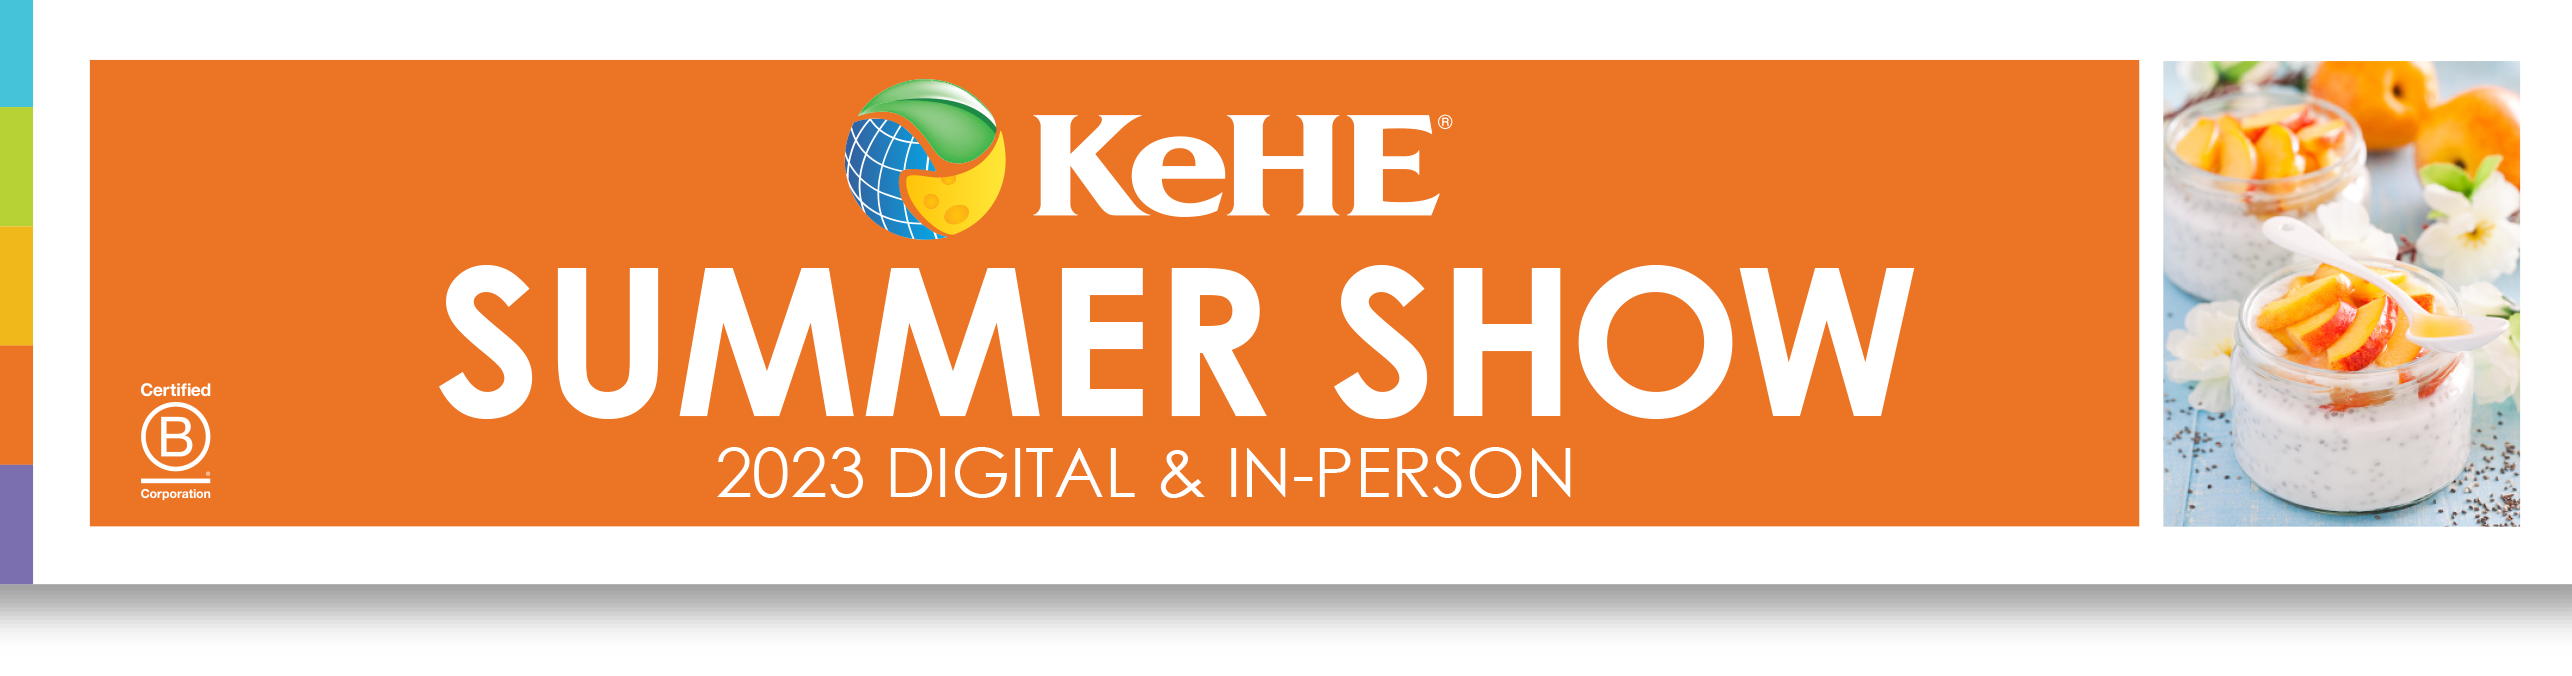 KeHE Summer Show 2023 Exhibitor Booth Registration